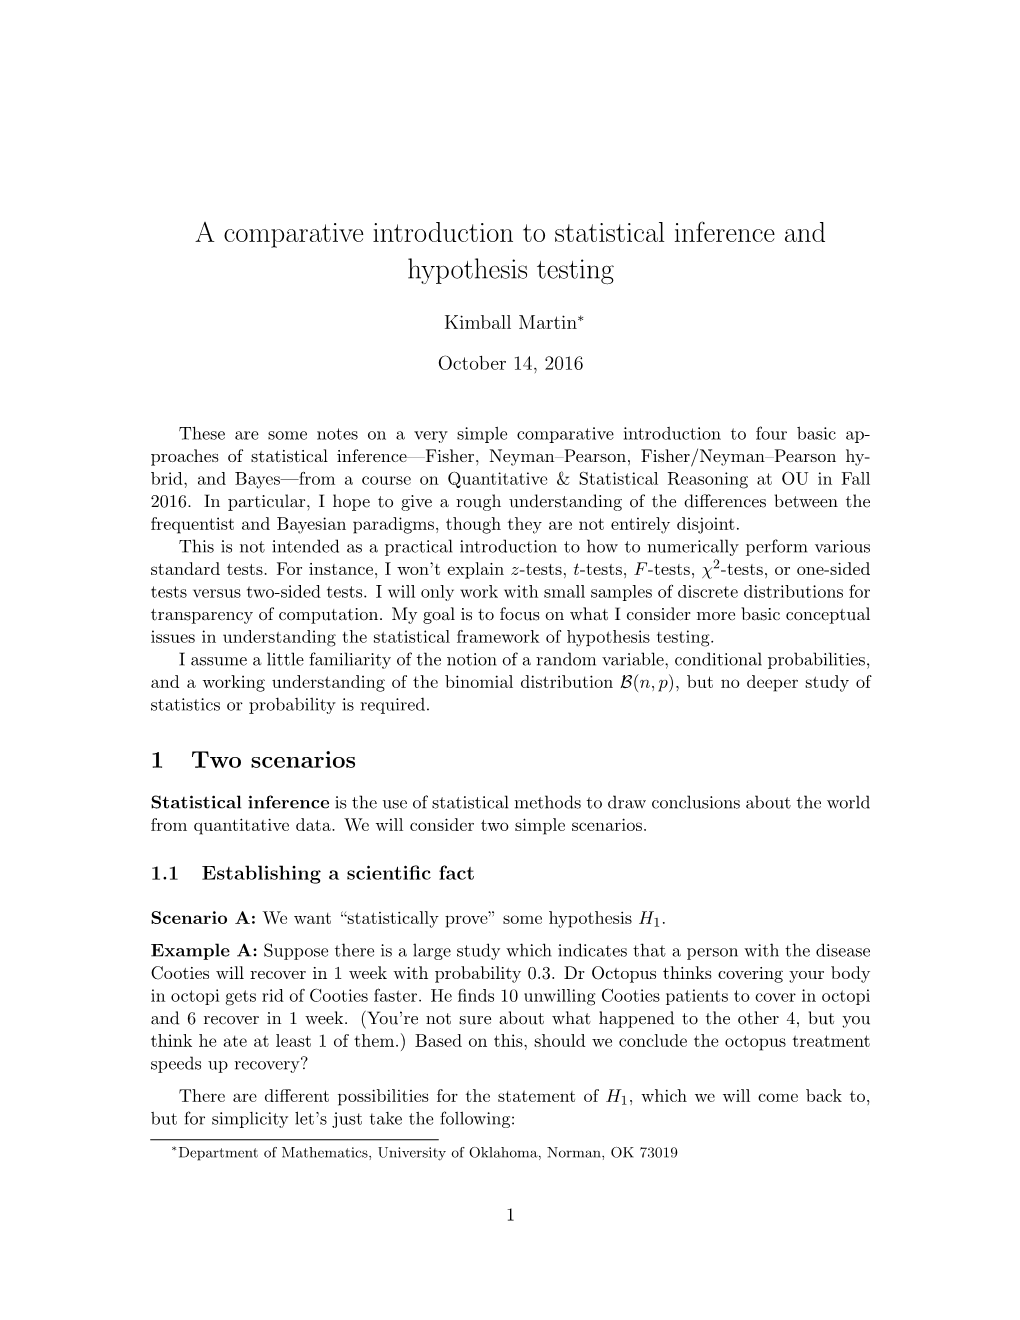 A Comparative Introduction to Statistical Inference and Hypothesis Testing